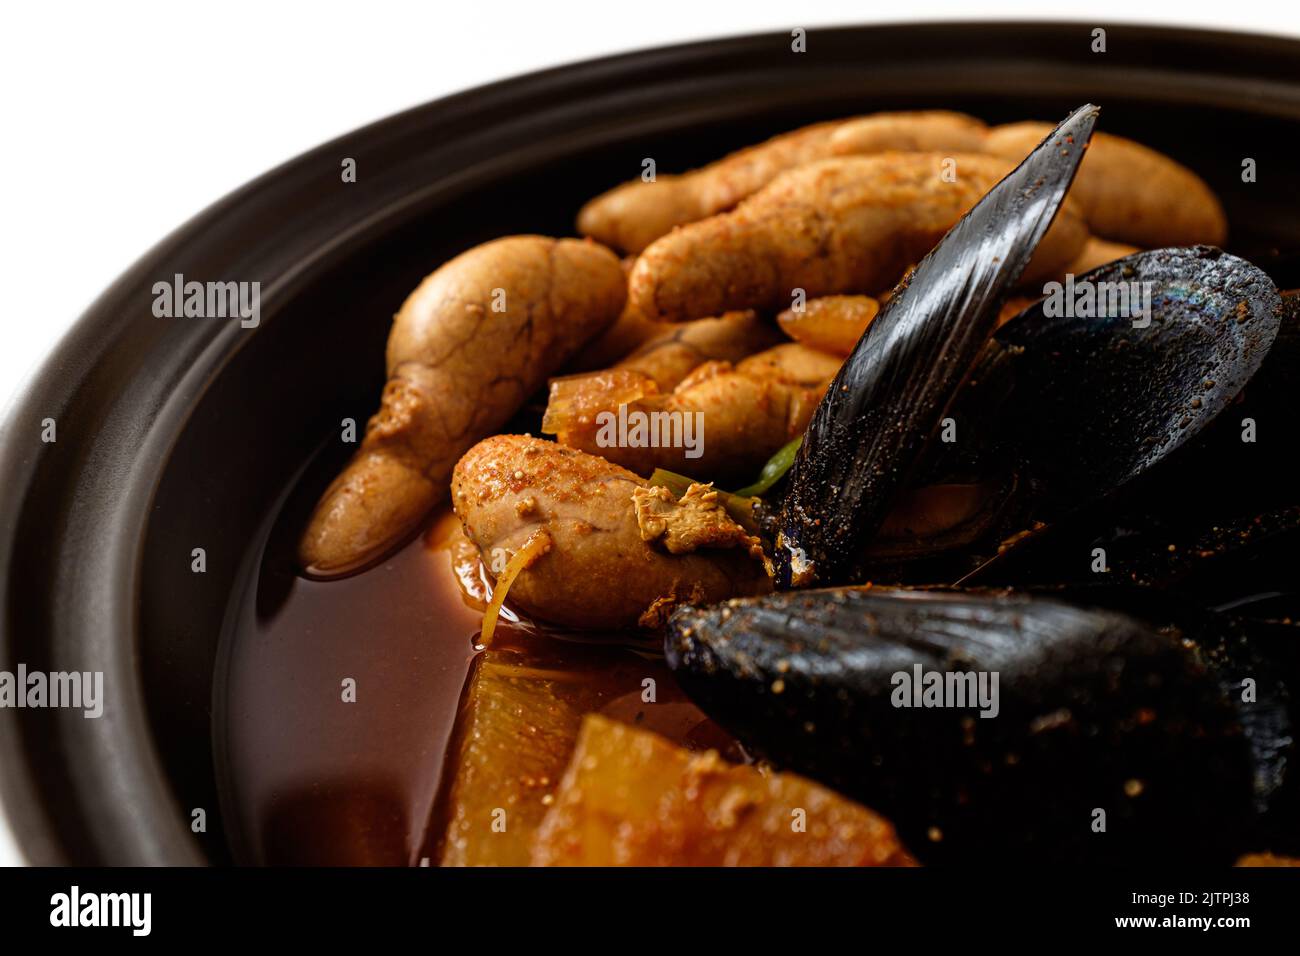 Korean food culture. Food with pollack roe. Spicy soup dish with seafood and vegetables Stock Photo